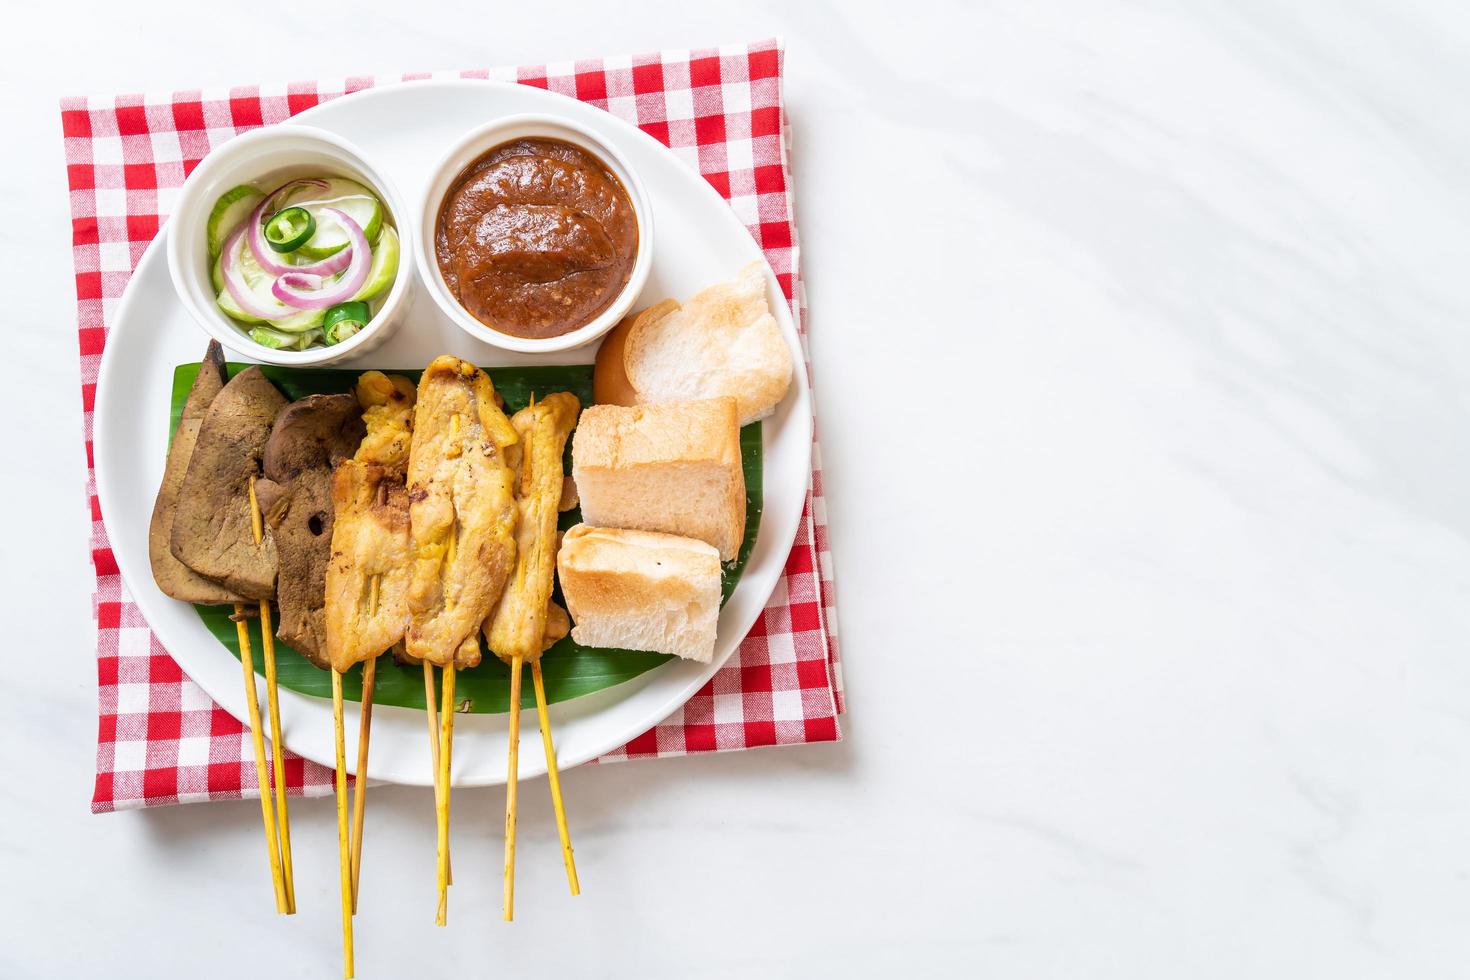 Pork Satay with your Peanut Sauce  and pickles which are cucumber slices and onions in vinegar photo